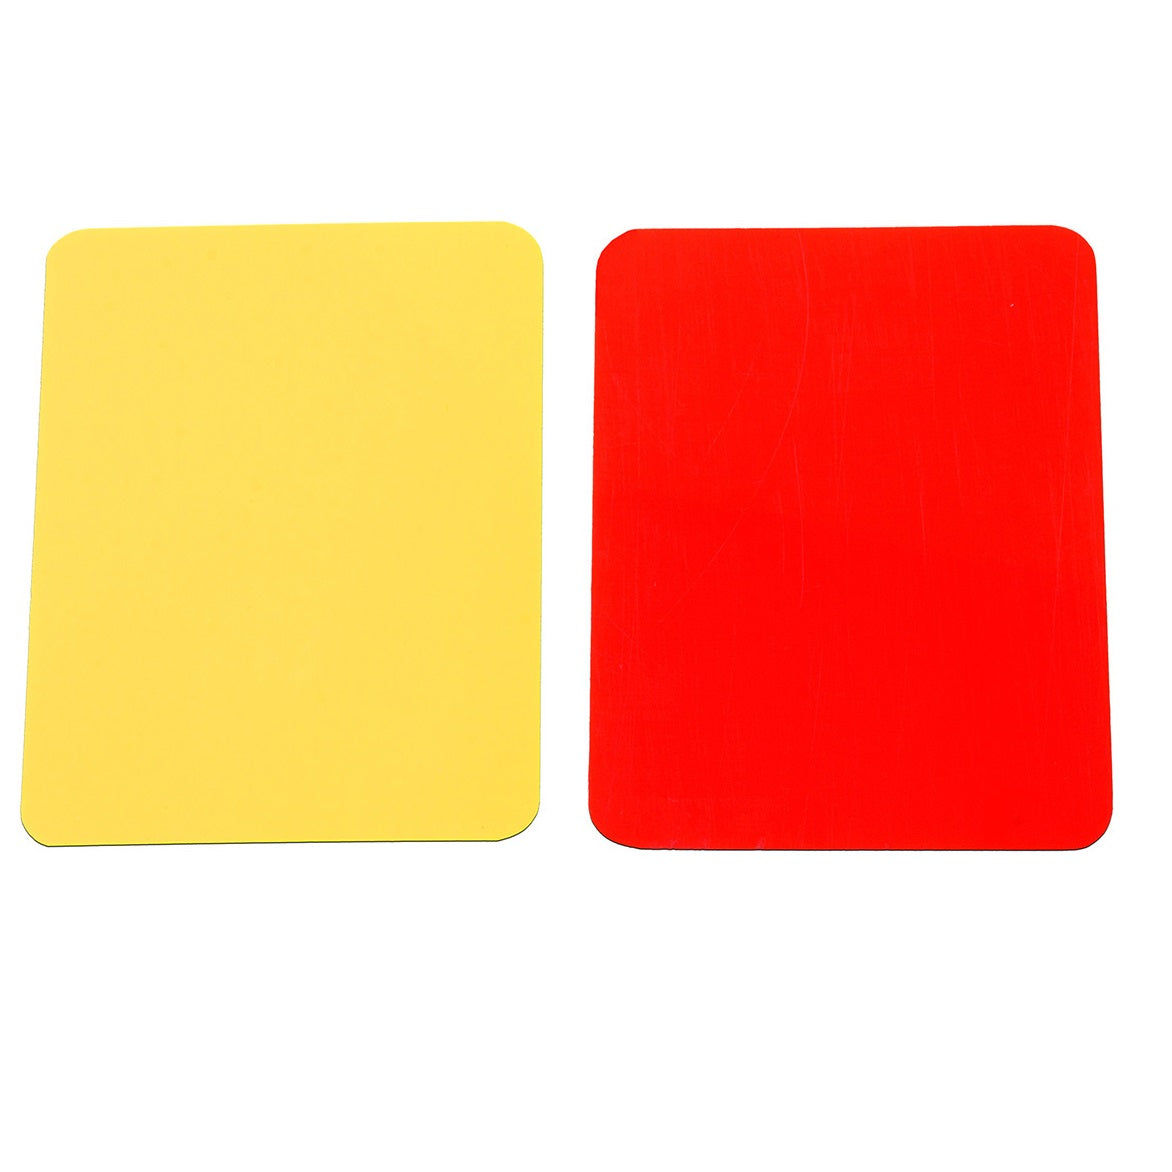 Red & Yellow Cards